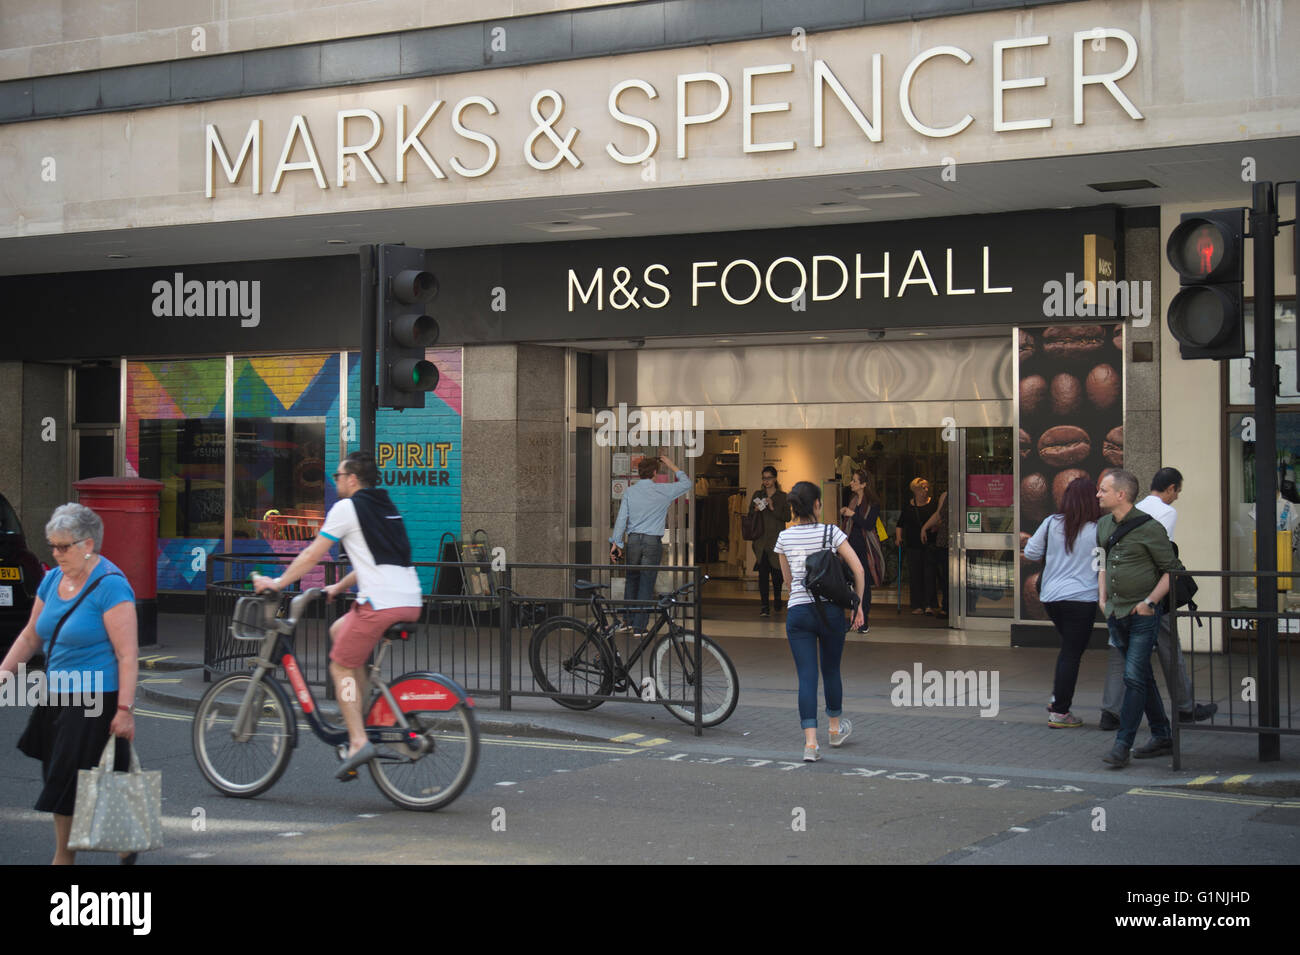 M&S Foodhall logo on the exterior of the Oxford Street branch Stock Photo